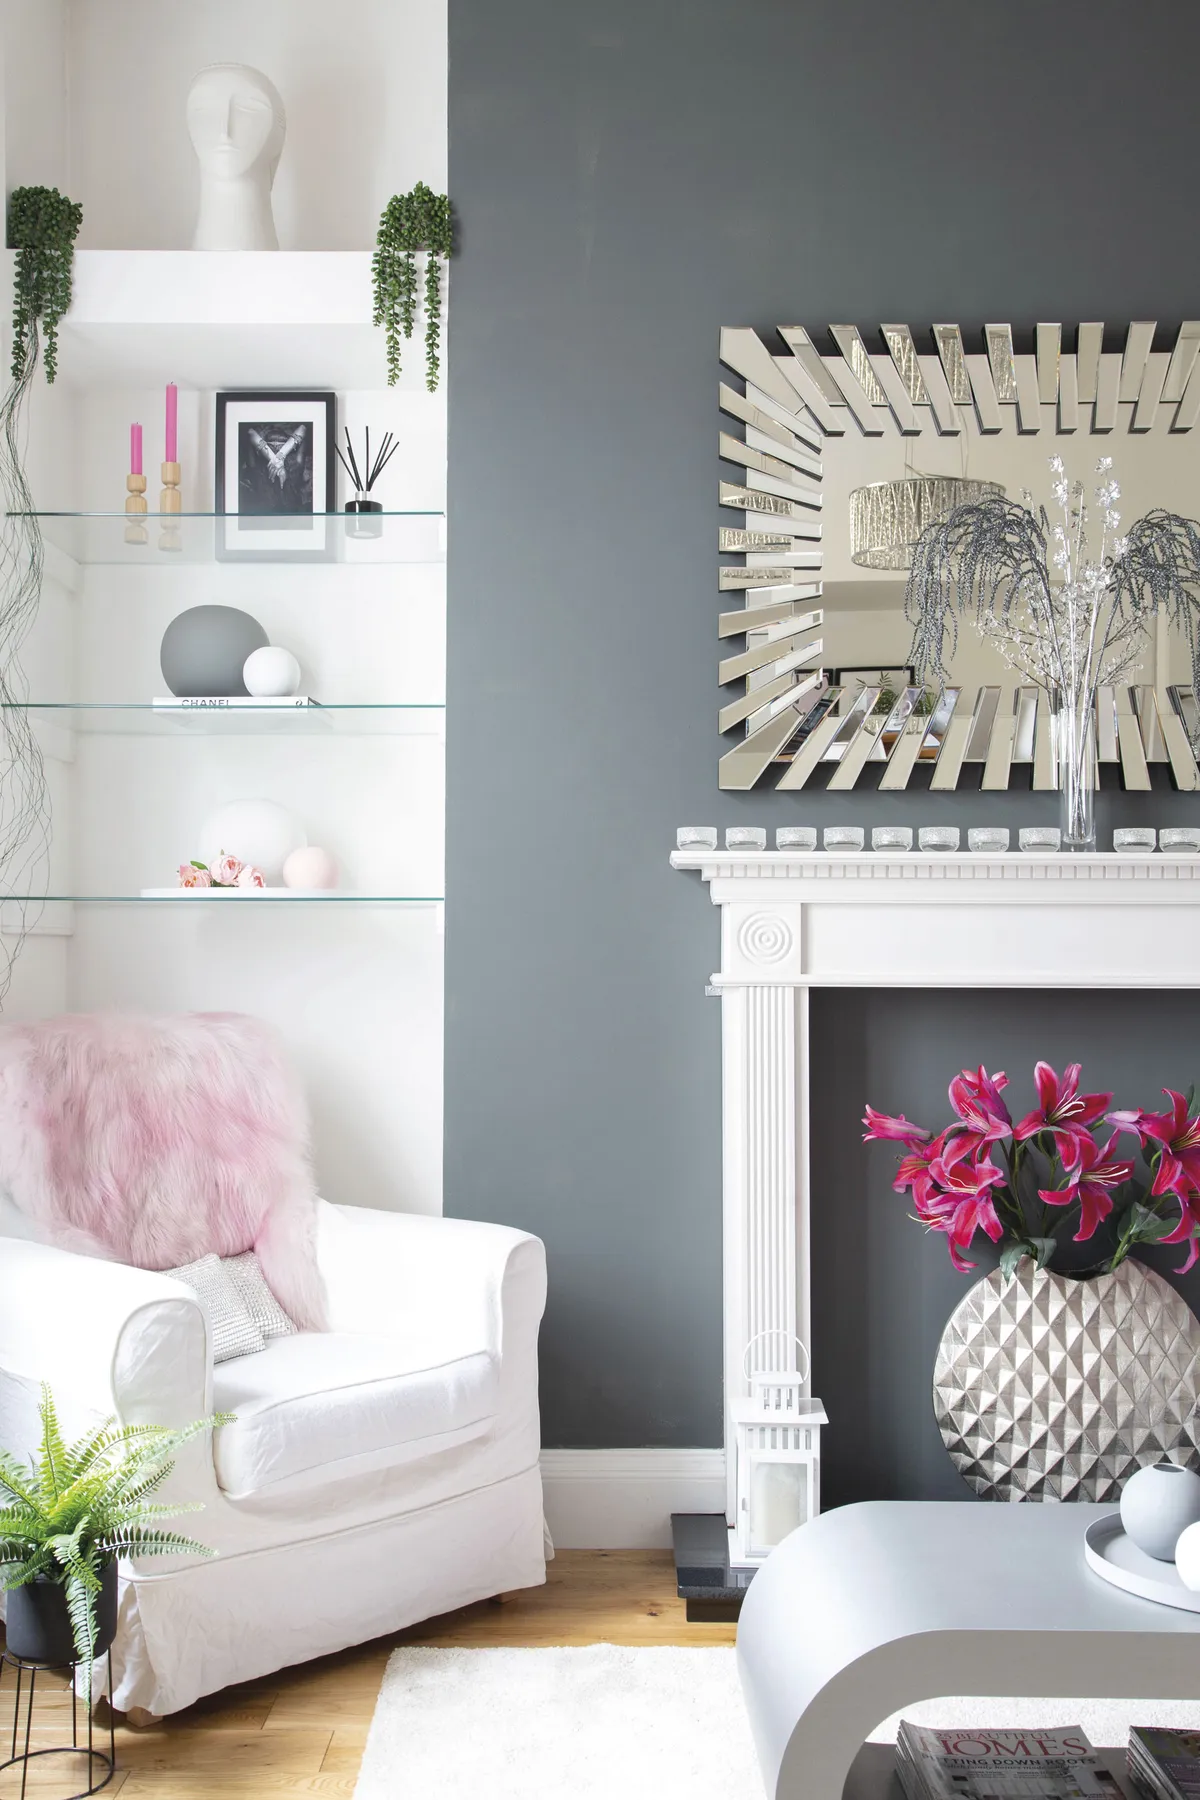 Lesley’s pared-back white and grey palette in the living room allows her to get creative with artwork and accessories